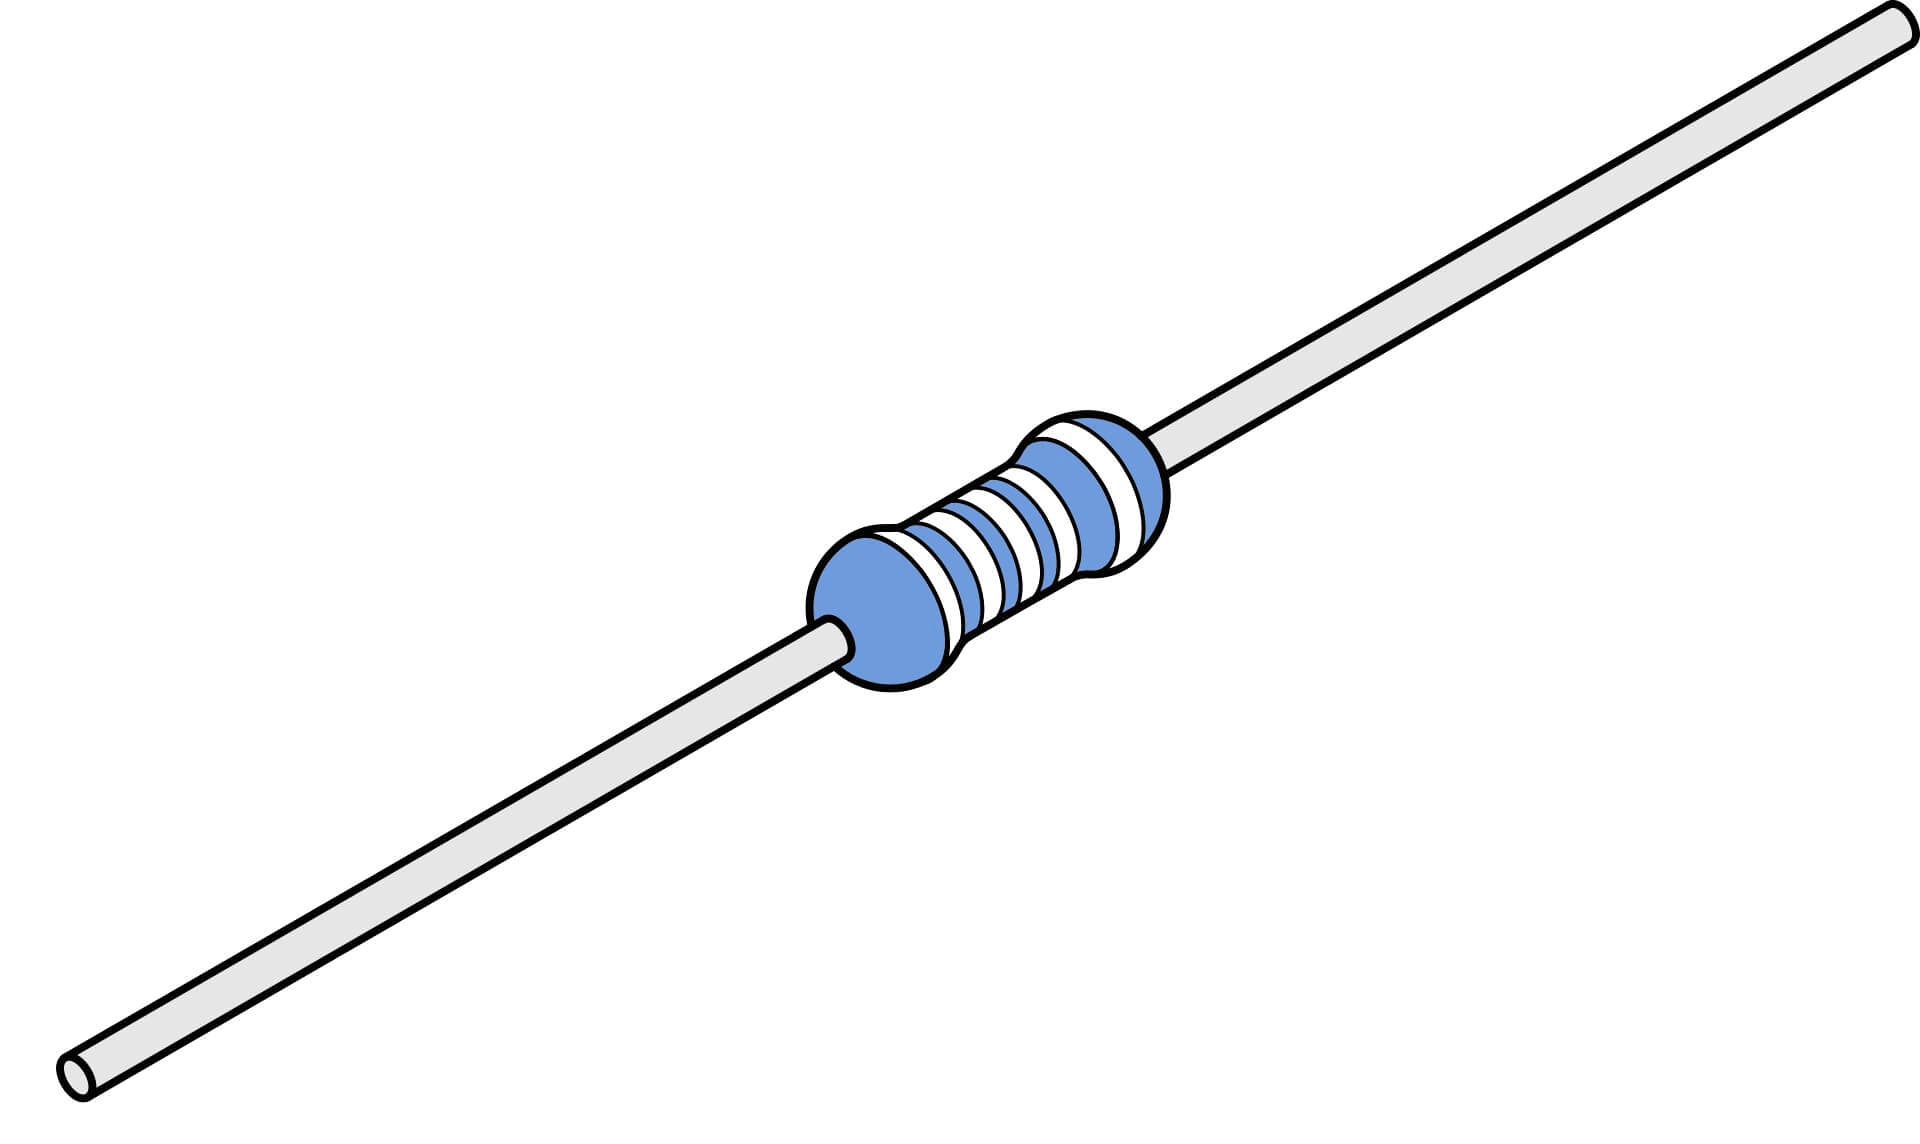 Overview of Resistor